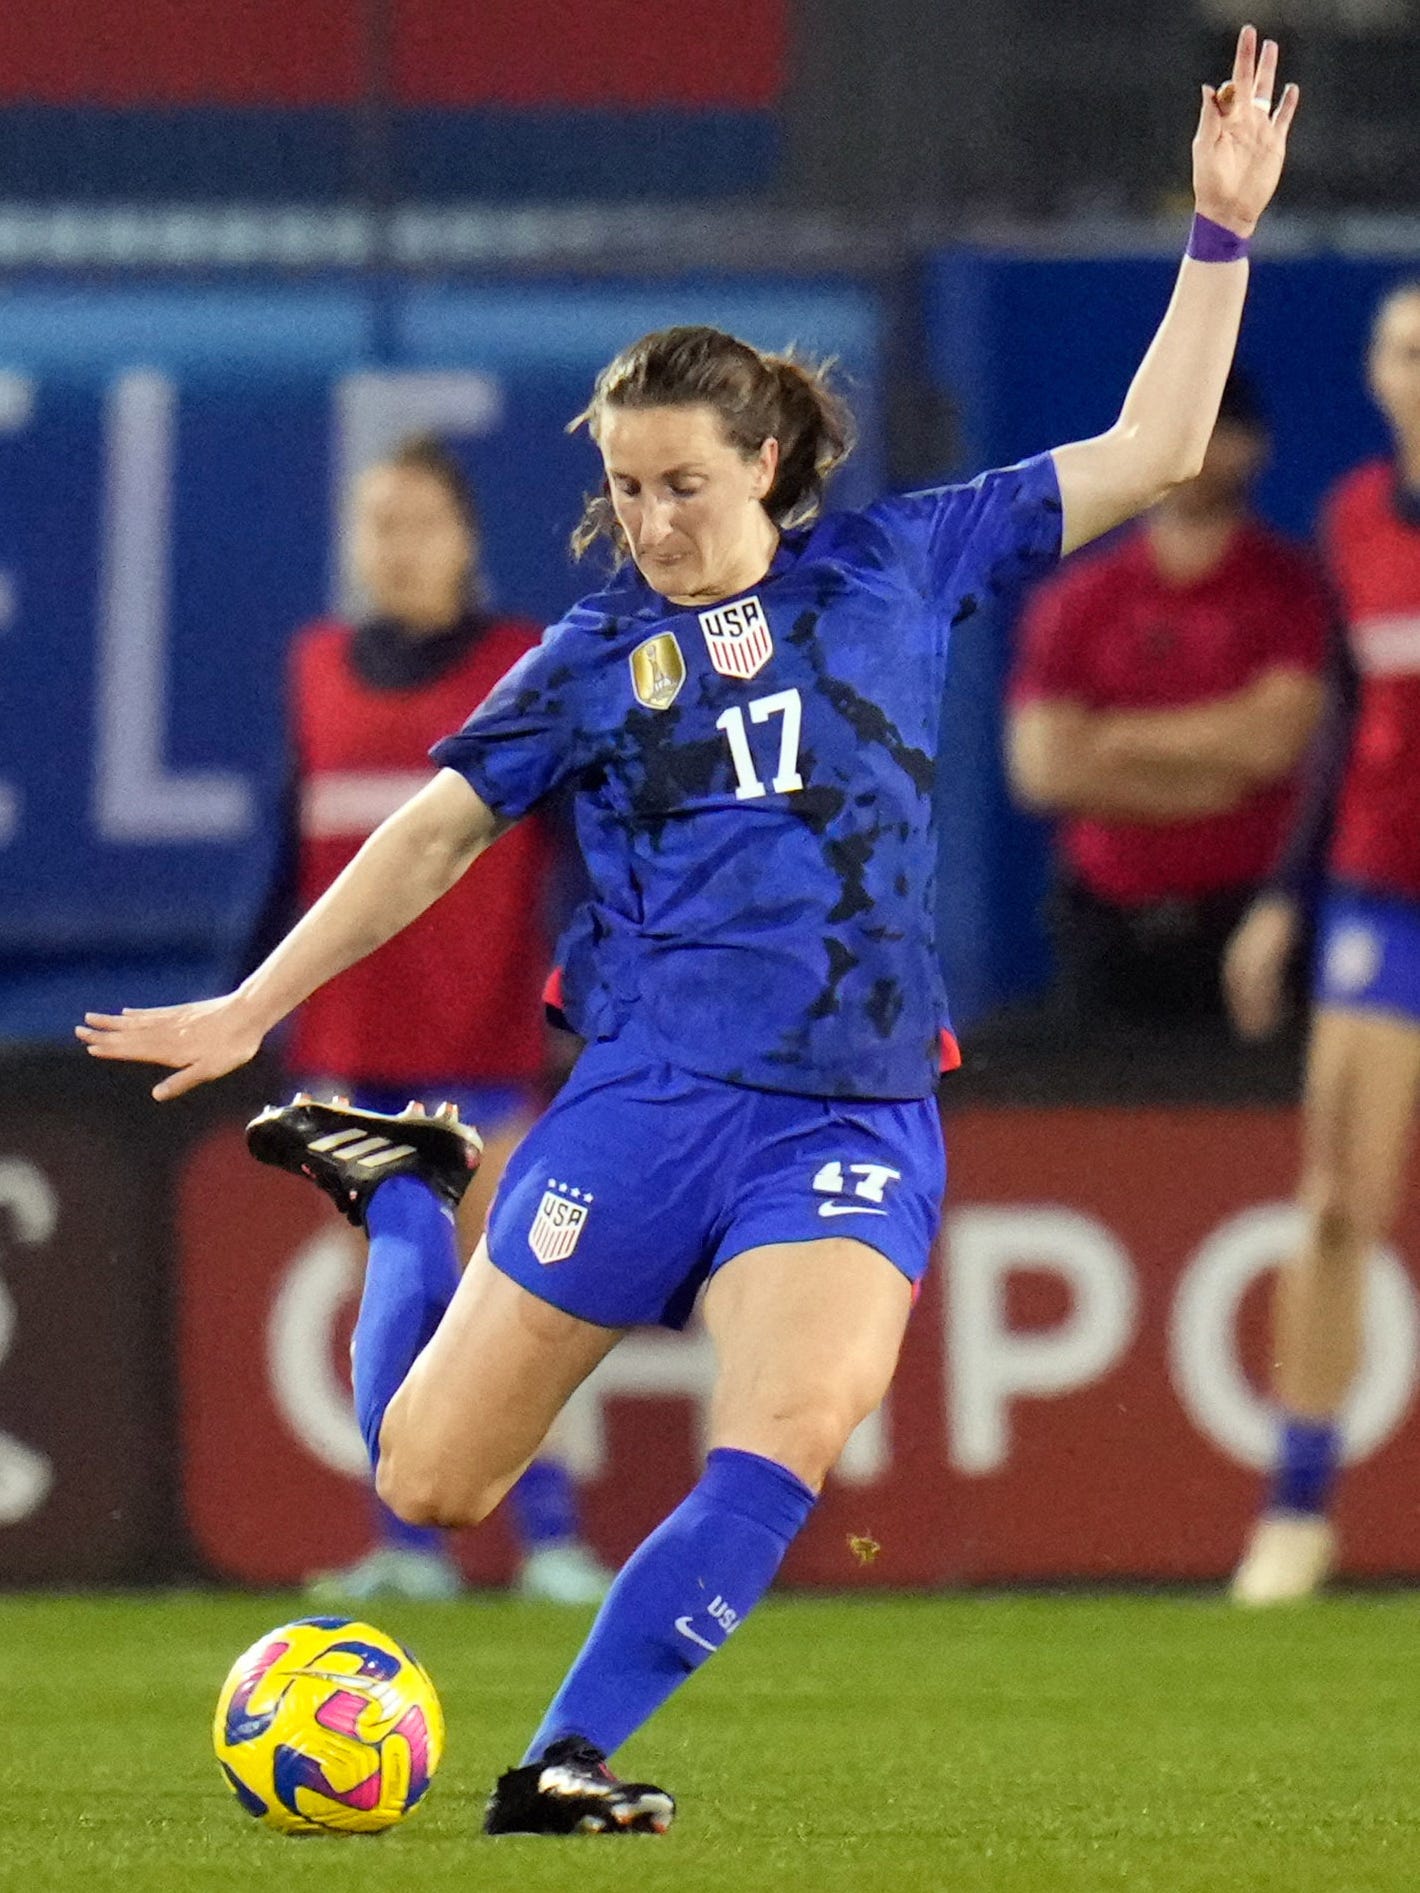 An action image of Andi Sullivan playing soccer.